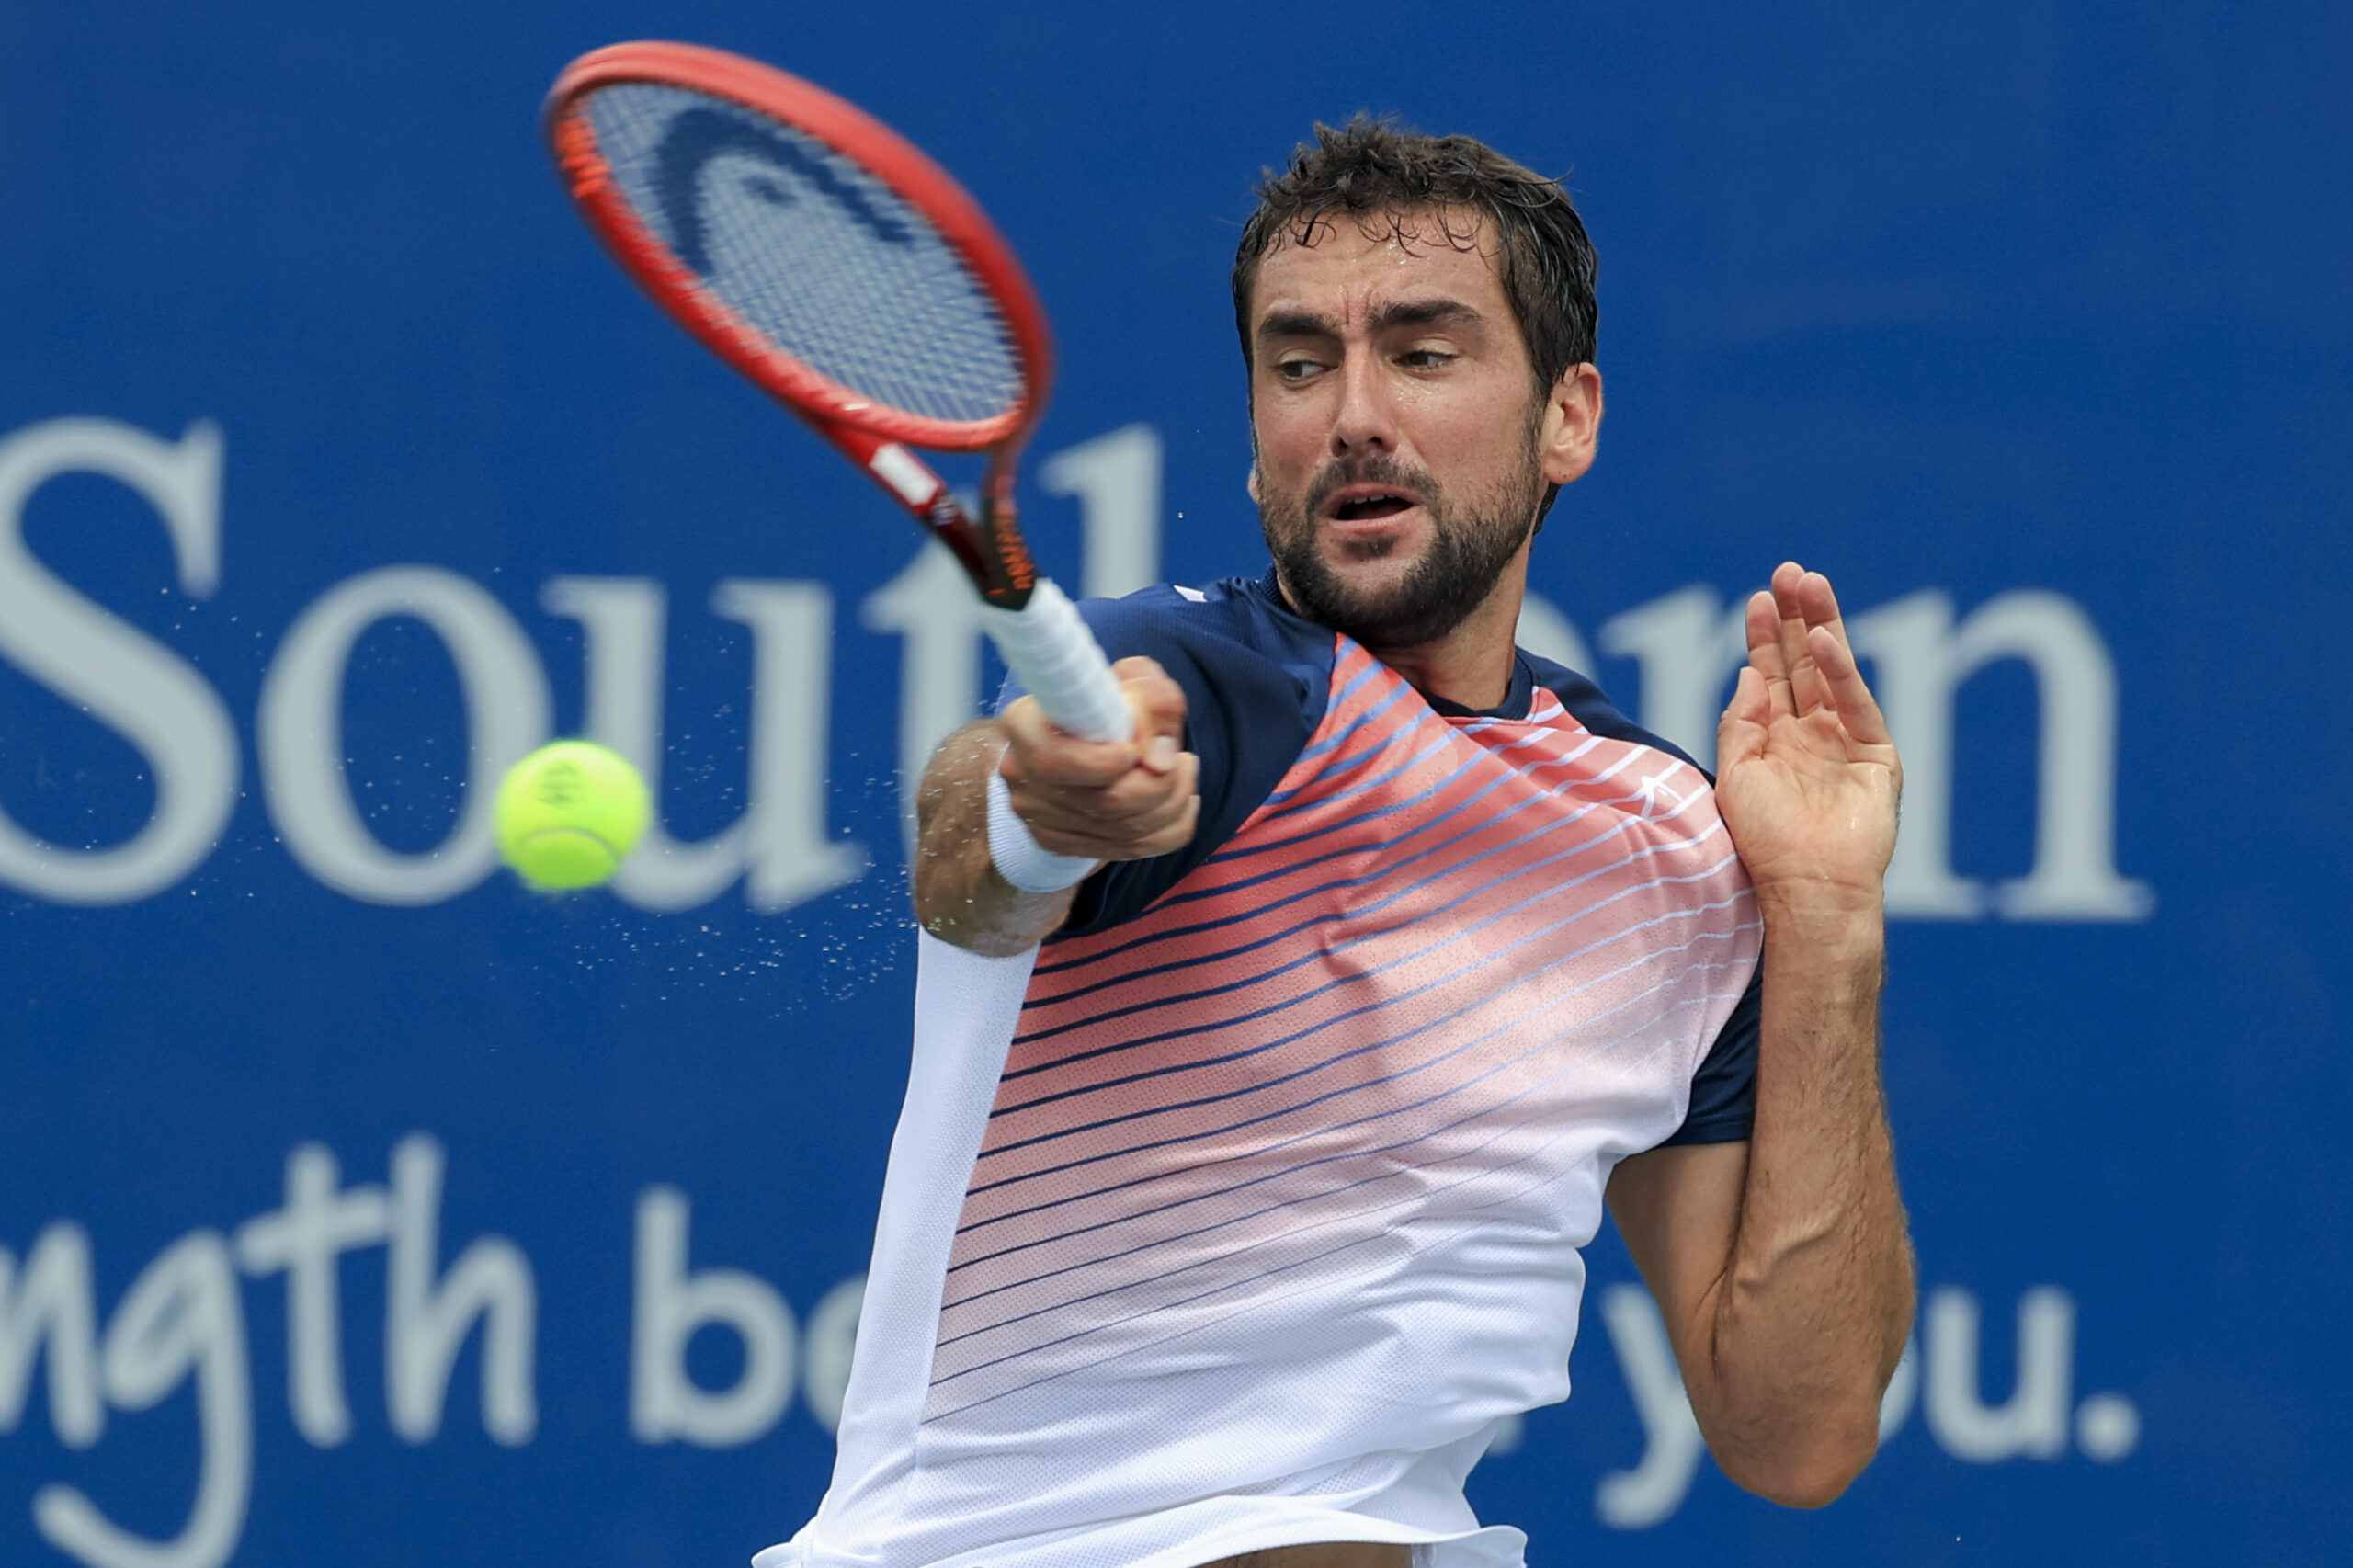 Adelaide International 2: Marin Cilic advances to Adelaide semis with easy win over Tommy Paul, Khachanov bows out